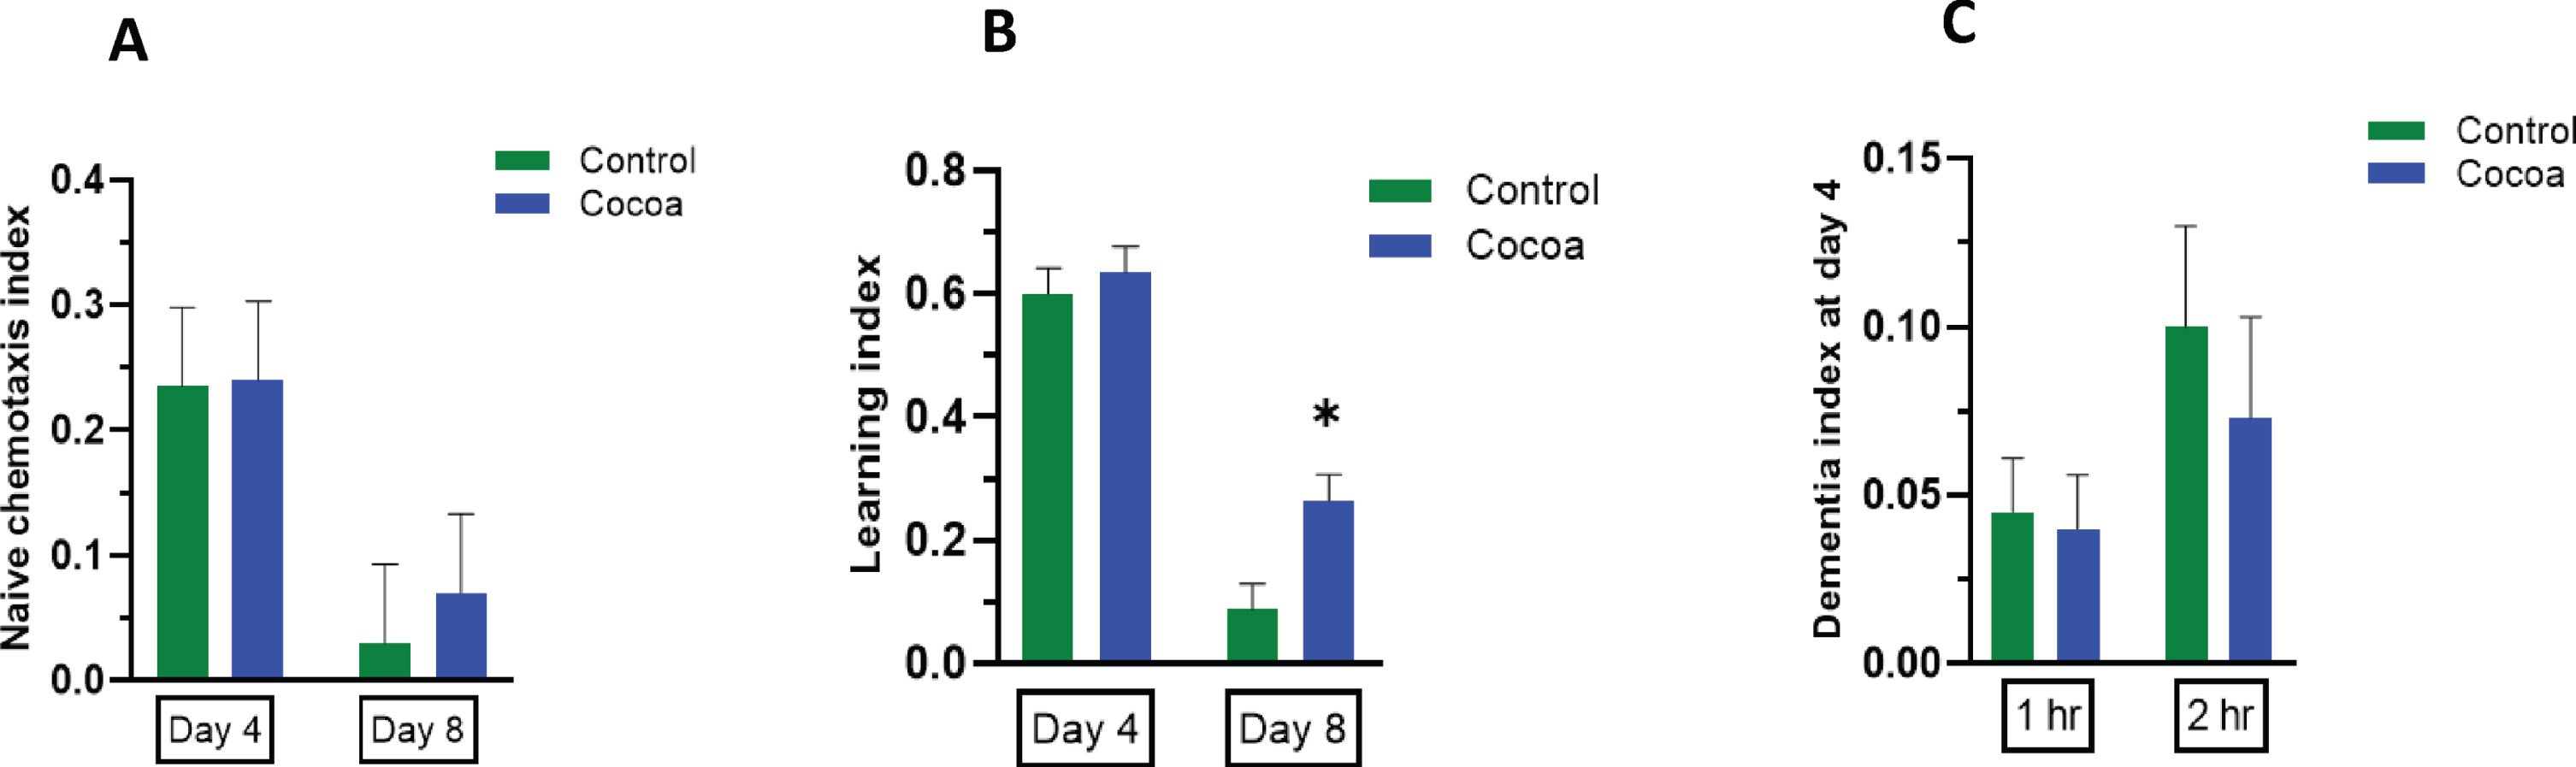 Naive chemotaxis index, learning index and dementia index (short-term memory loss) of control and cocoa-supplemented wild type (N2) C. elegans as measured at day 4 (1st day of adulthood) and day 8 (5th day of adulthood) using C. elegans positive butanone learning and short-term memory assay. Chemotaxis assay was performed for well-fed, synchronized worms and naive chemotaxis index was calculated; chemotaxis index (CI) =  [(number of worms at butanone) –(number of worms at ethanol)]/ [total number of worms on the plate]. Well-fed, synchronized worms were starved for 1 hour, then fed in the presence of 10%butanone for 1 hour. Worms were tested immediately after food-butanone association for 1 hour for their learning; learning Index (LI) = chemotaxis indext –chemotaxis indexNaive. Dementia index (short-term associative memory loss) was measured after 1 hour and 2 hours from the food-butanone association without exposure to butanone again (Dementia indext = Learning index0 - Learning indext). Four independent experiments were performed (n≥50 worms per group). Values are expressed as mean±SEM. *P < 0.05 for the indicated comparison (calculated using multivariate test, general linear model). (A) There was no significant effect of cocoa supplementation on naive chemotaxis index at both day 4 and 8. (B) Cocoa supplementation significantly increased the learning index at day 8 (P < 0.05). (C) Cocoa-supplemented worms showed no significant difference in dementia index at day 4.